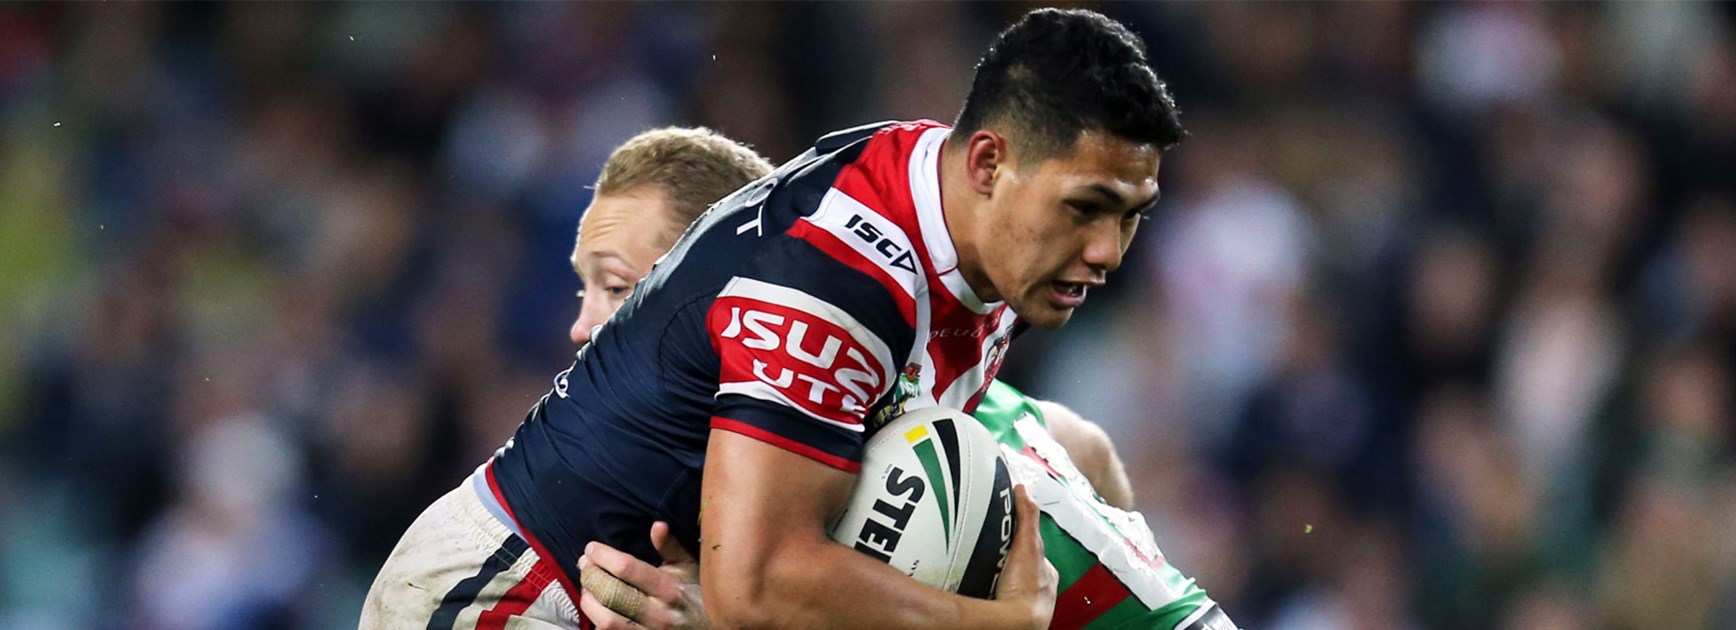 Roger Tuivasa-Sheck will be a major threat for South Sydney this weekend.